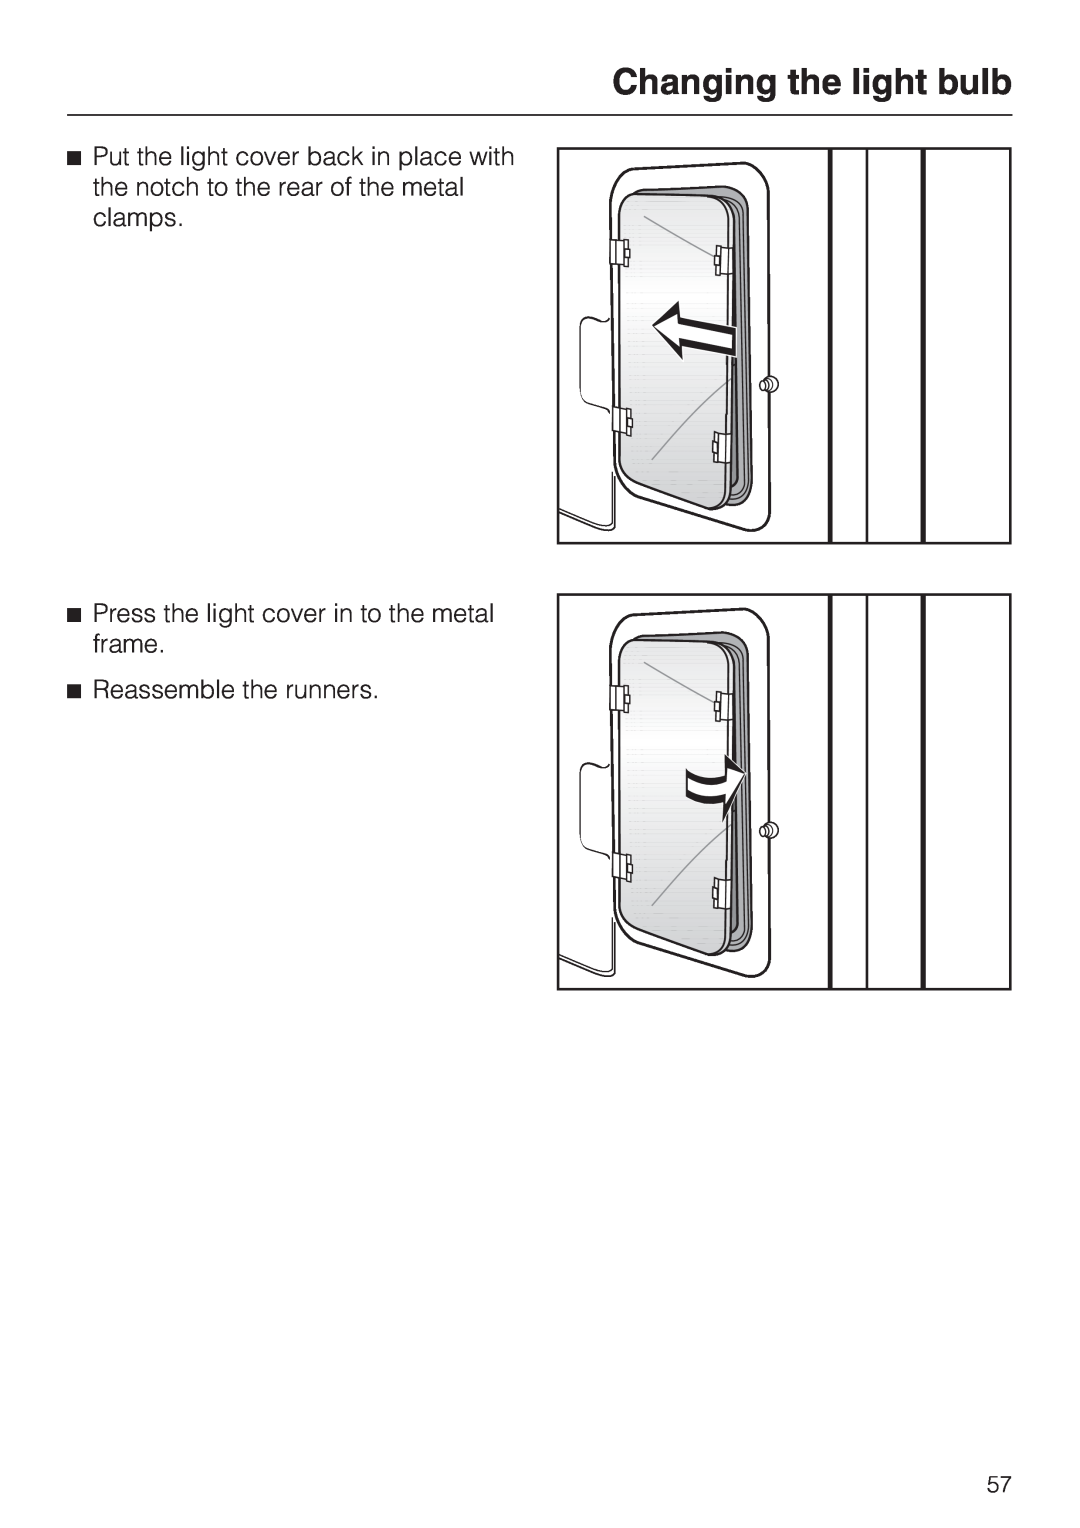 Miele H 394 manual Changing the light bulb, clamps ^Press the light cover in to the metal, frame ^ Reassemble the runners 